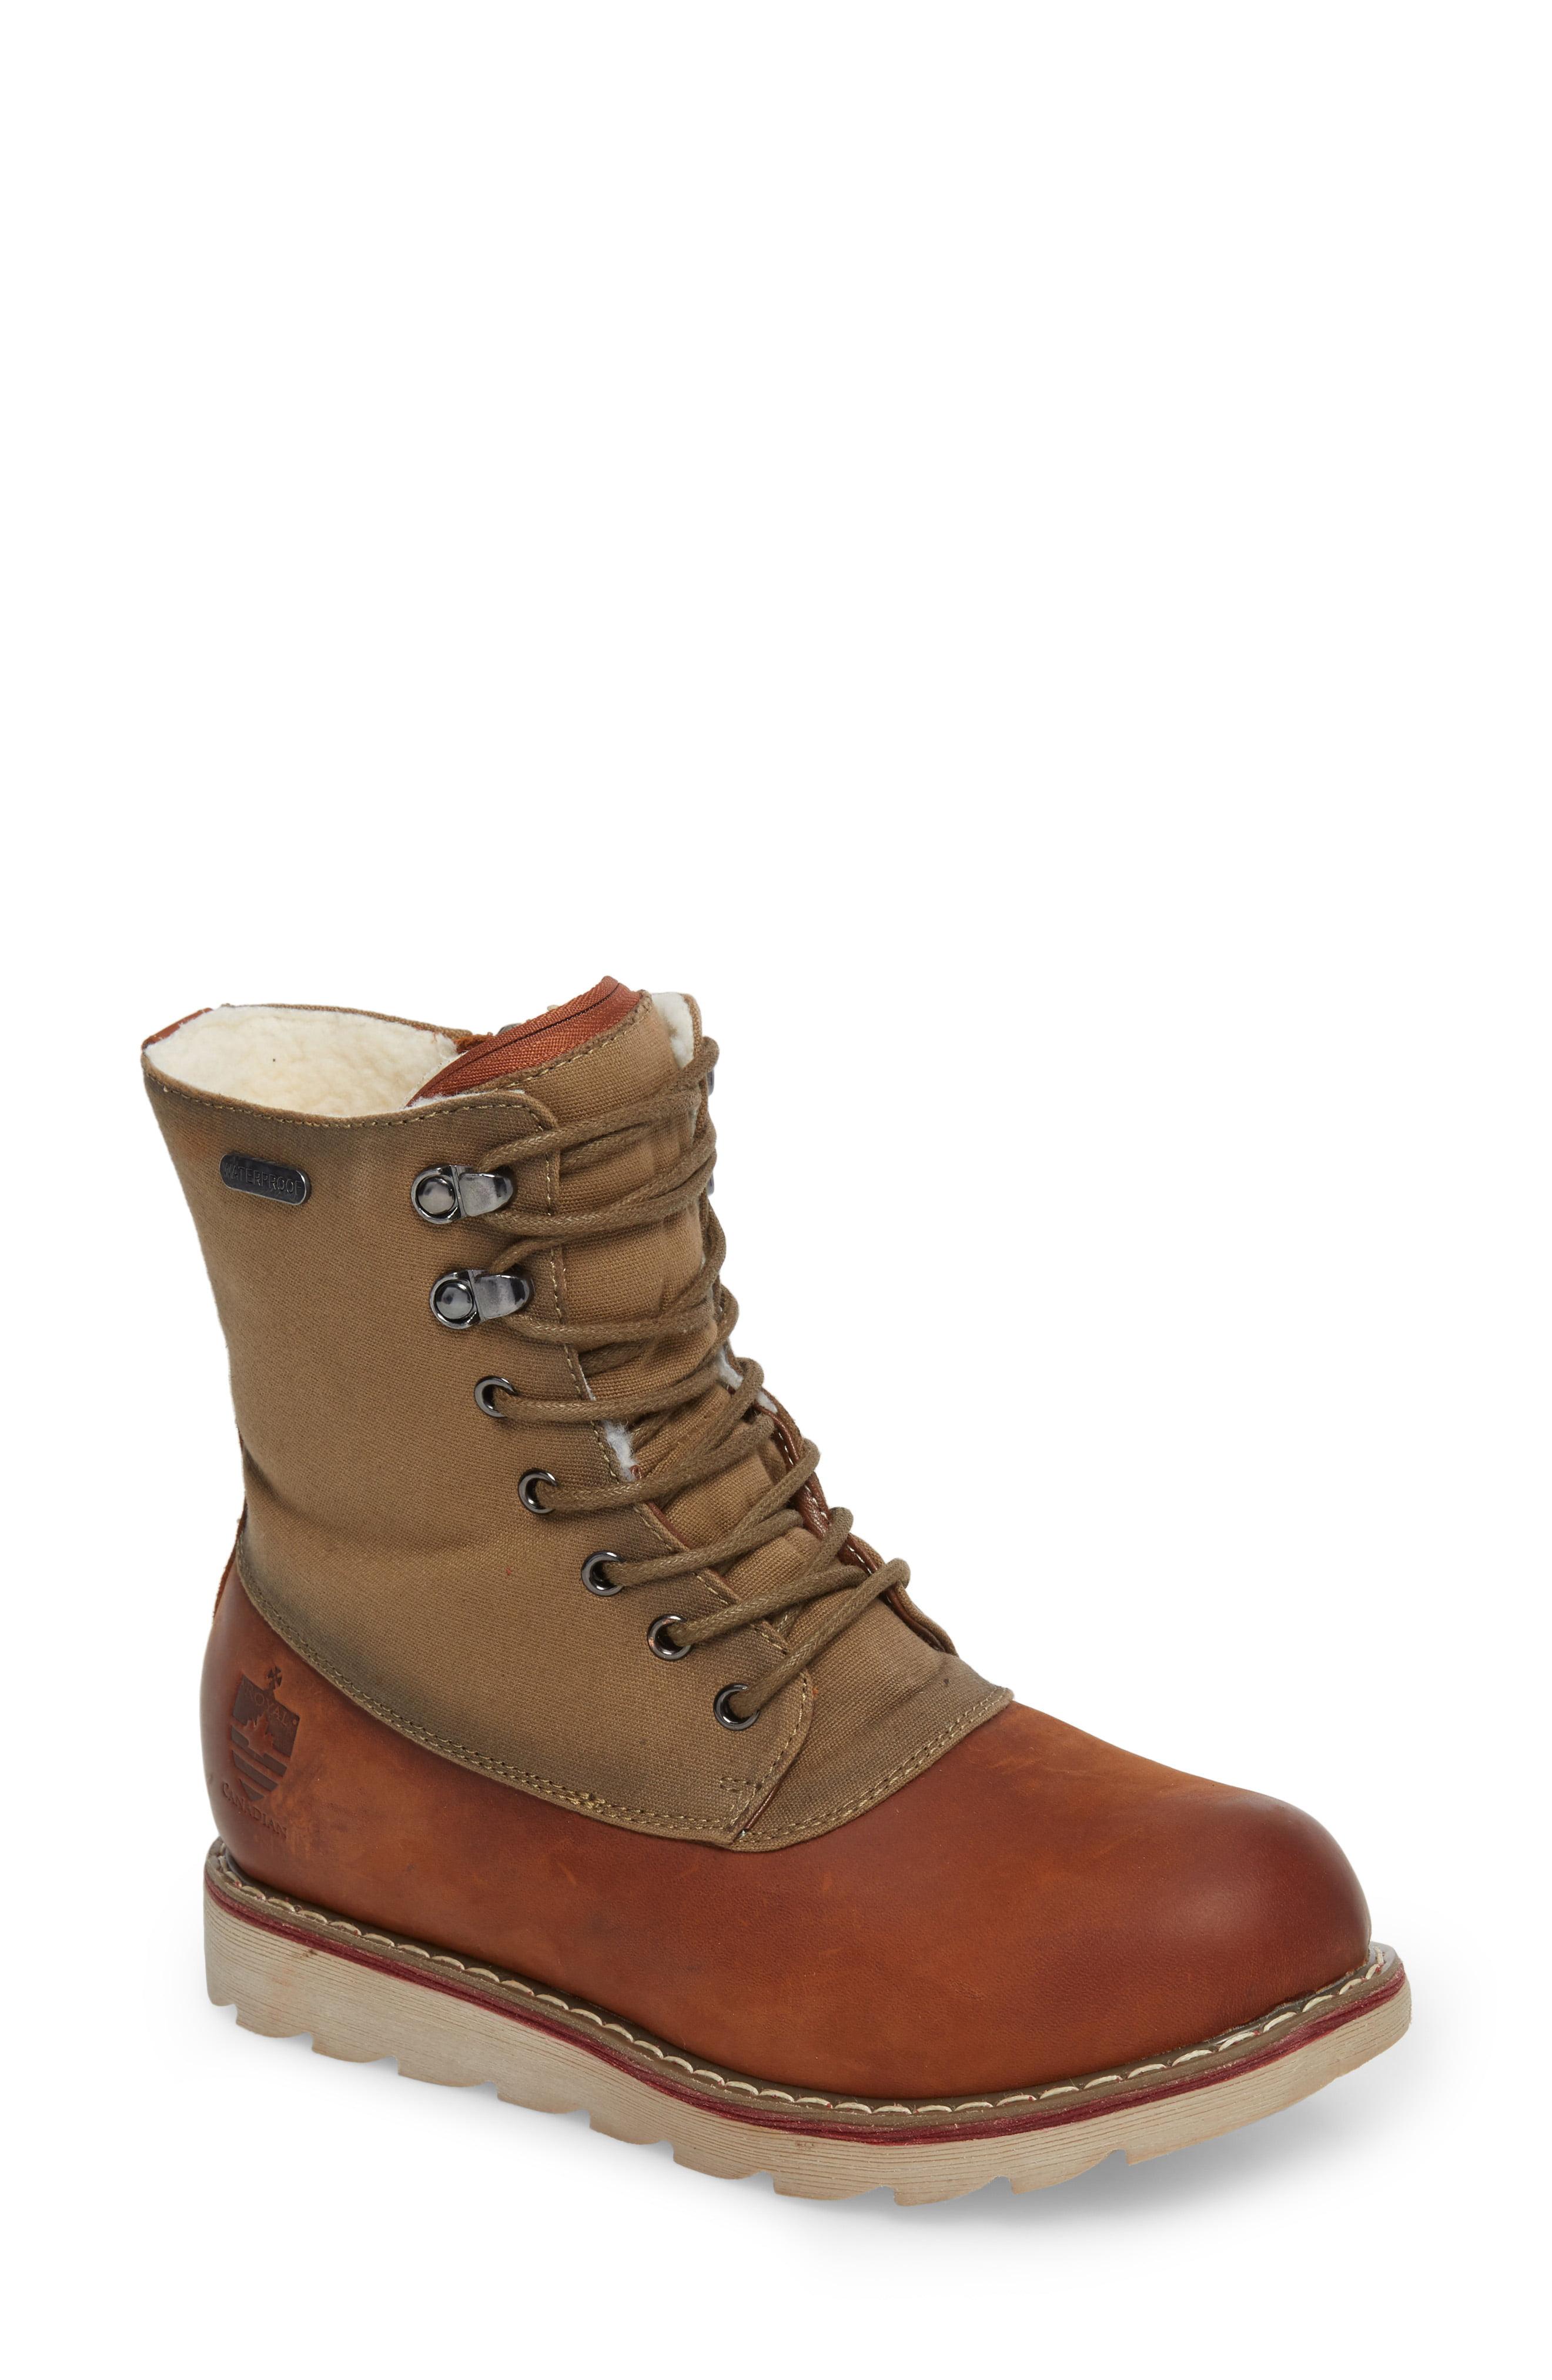 royal canadian lasalle boots